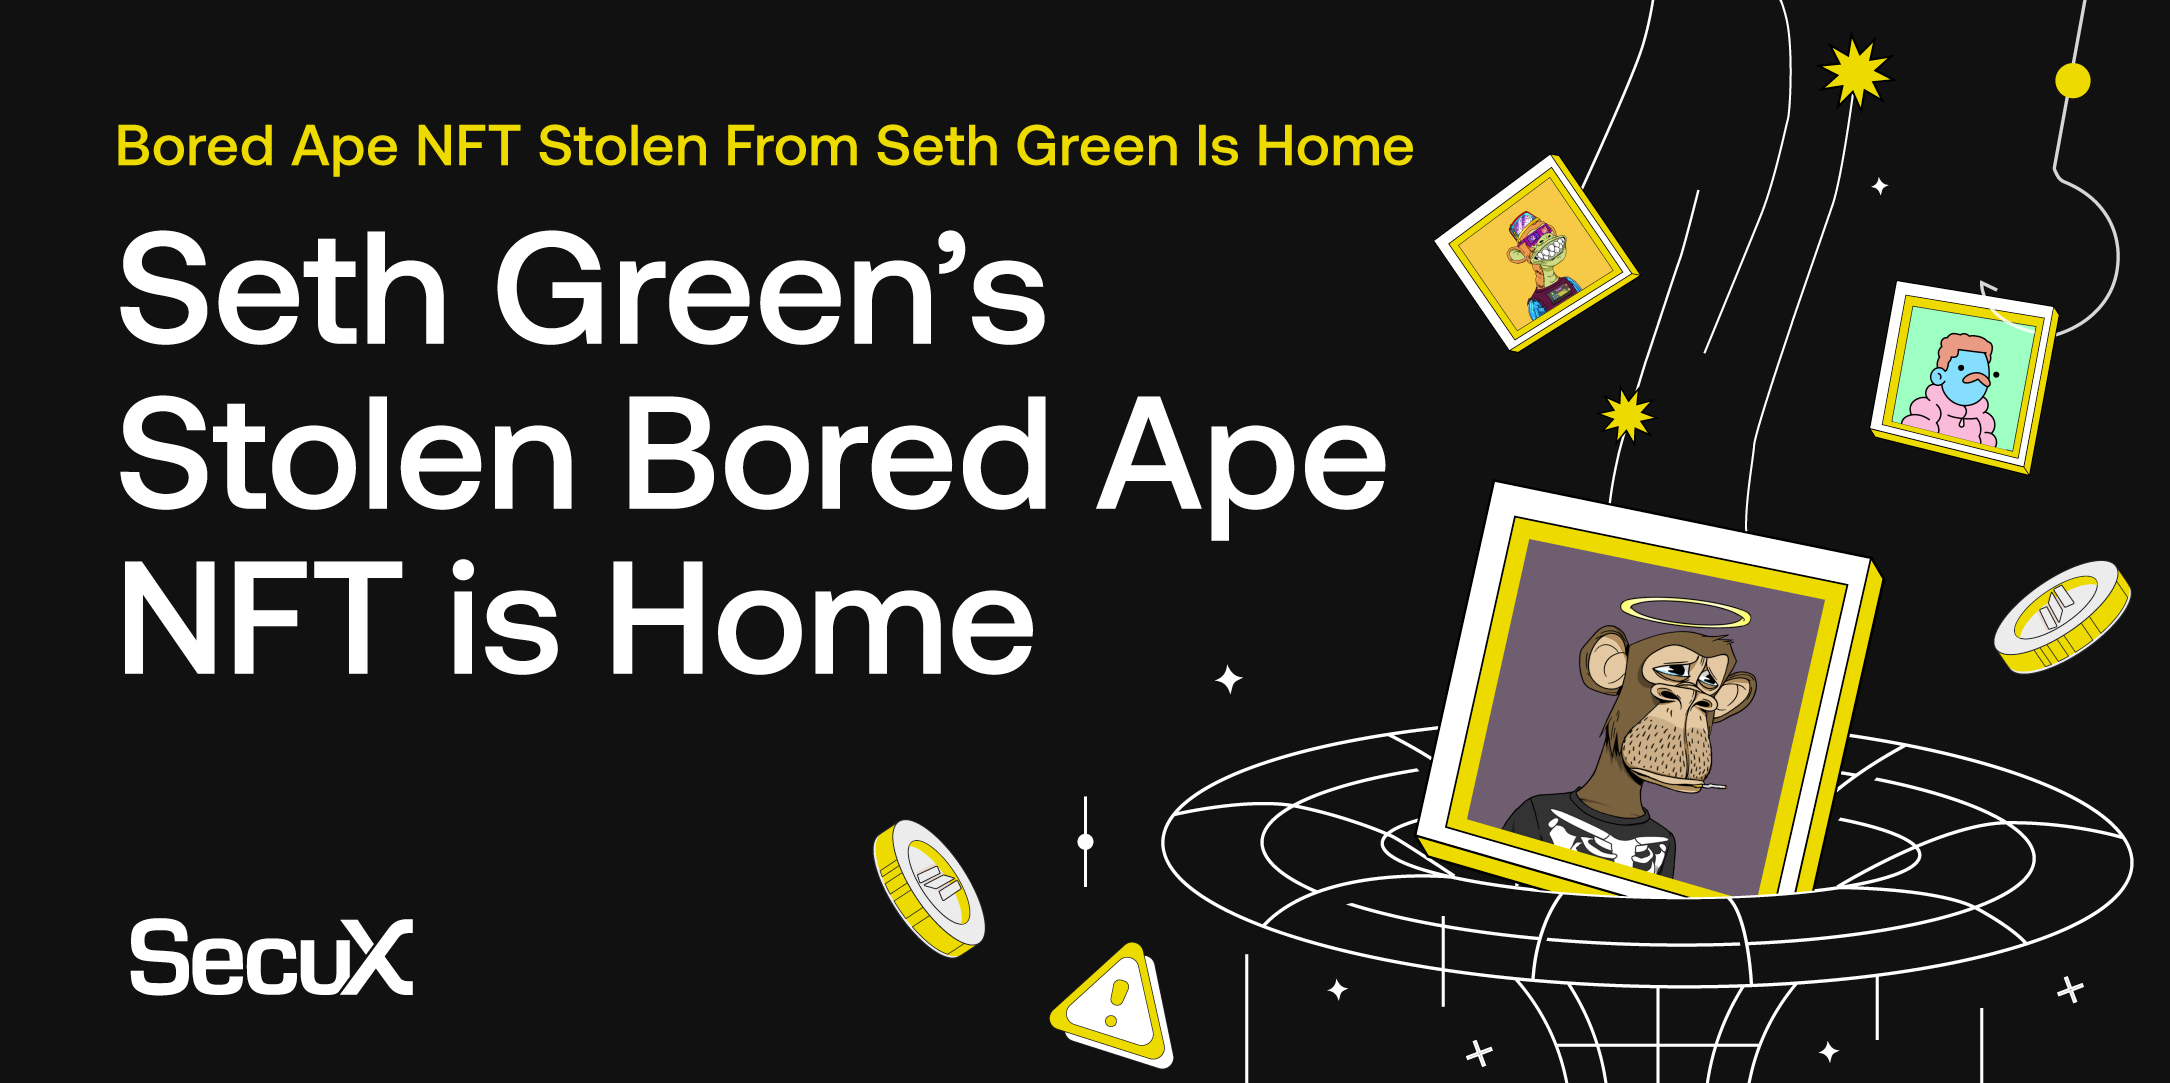 Bored Ape NFT Stolen From Seth Green Is Home!